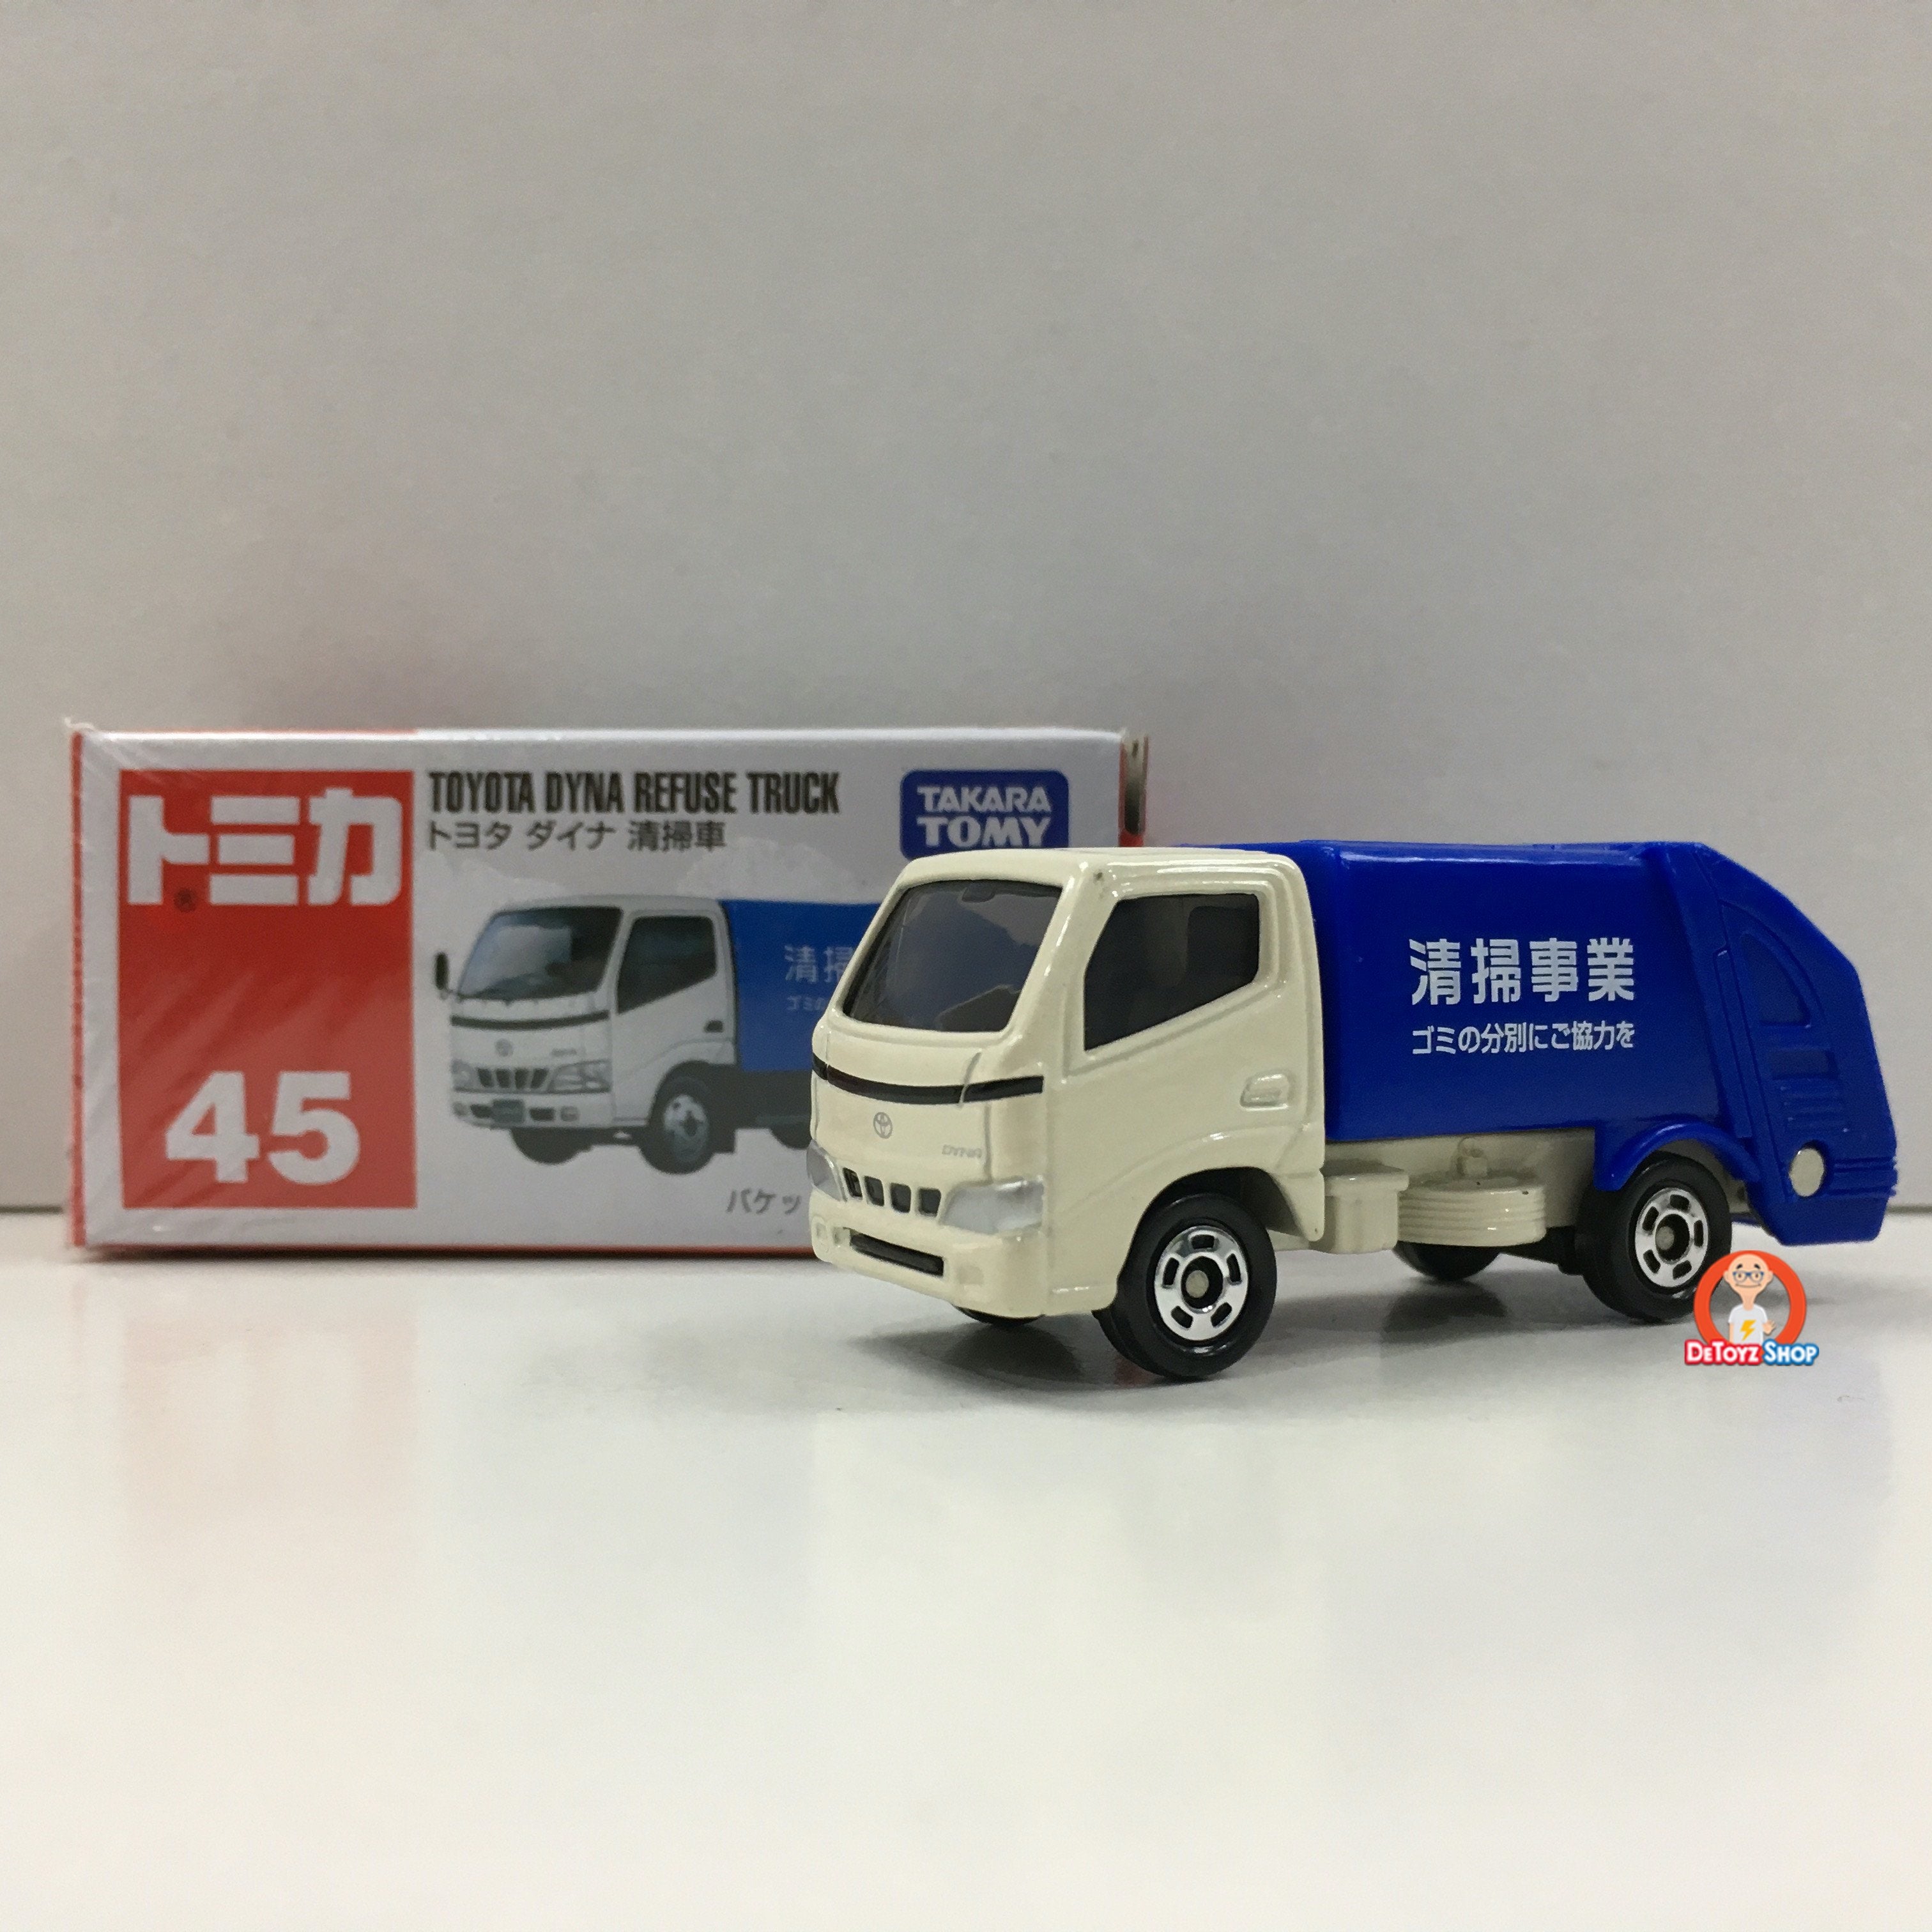 Tomica #45 Toyota DYNA Refuse Truck